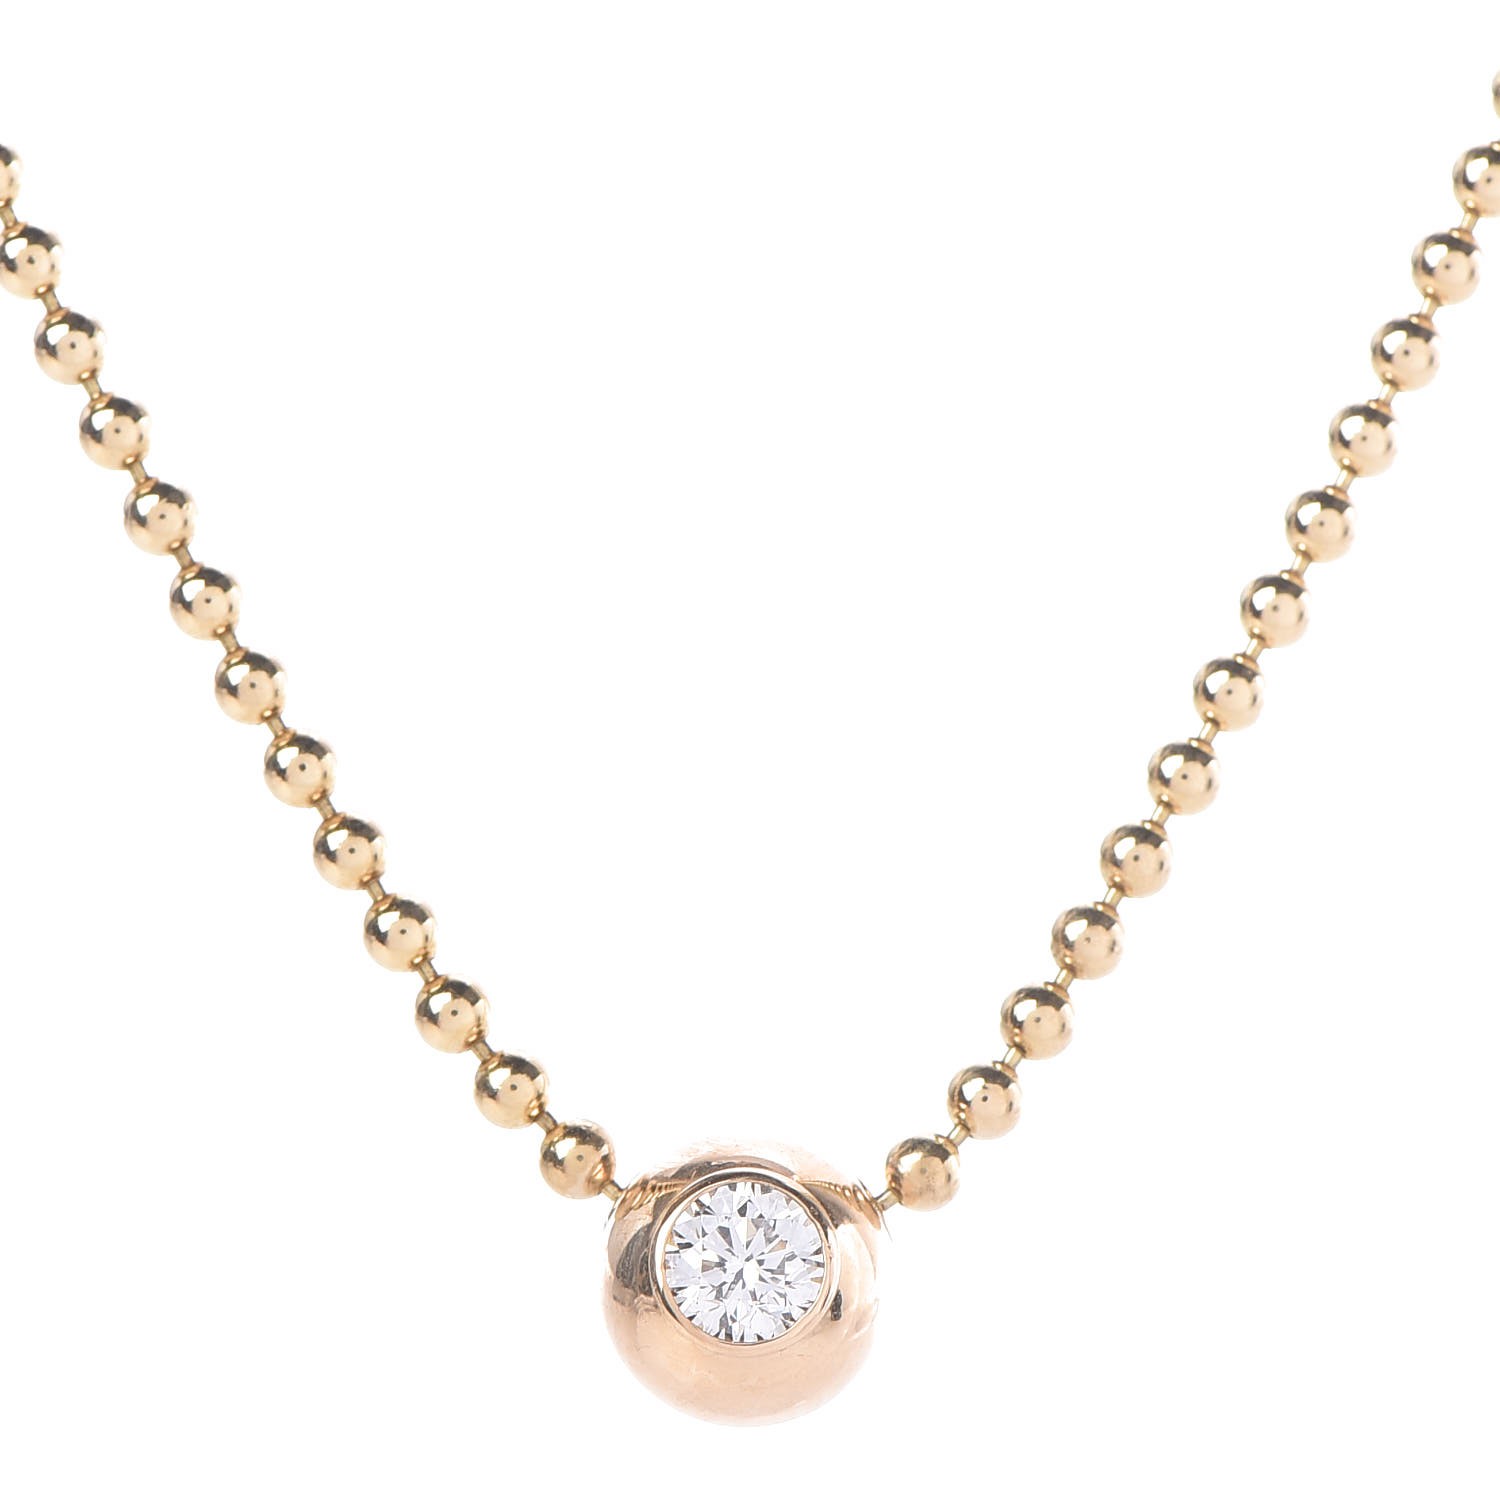 CARTIER 18K Yellow Gold Diamond Beaded Chain Necklace 339915